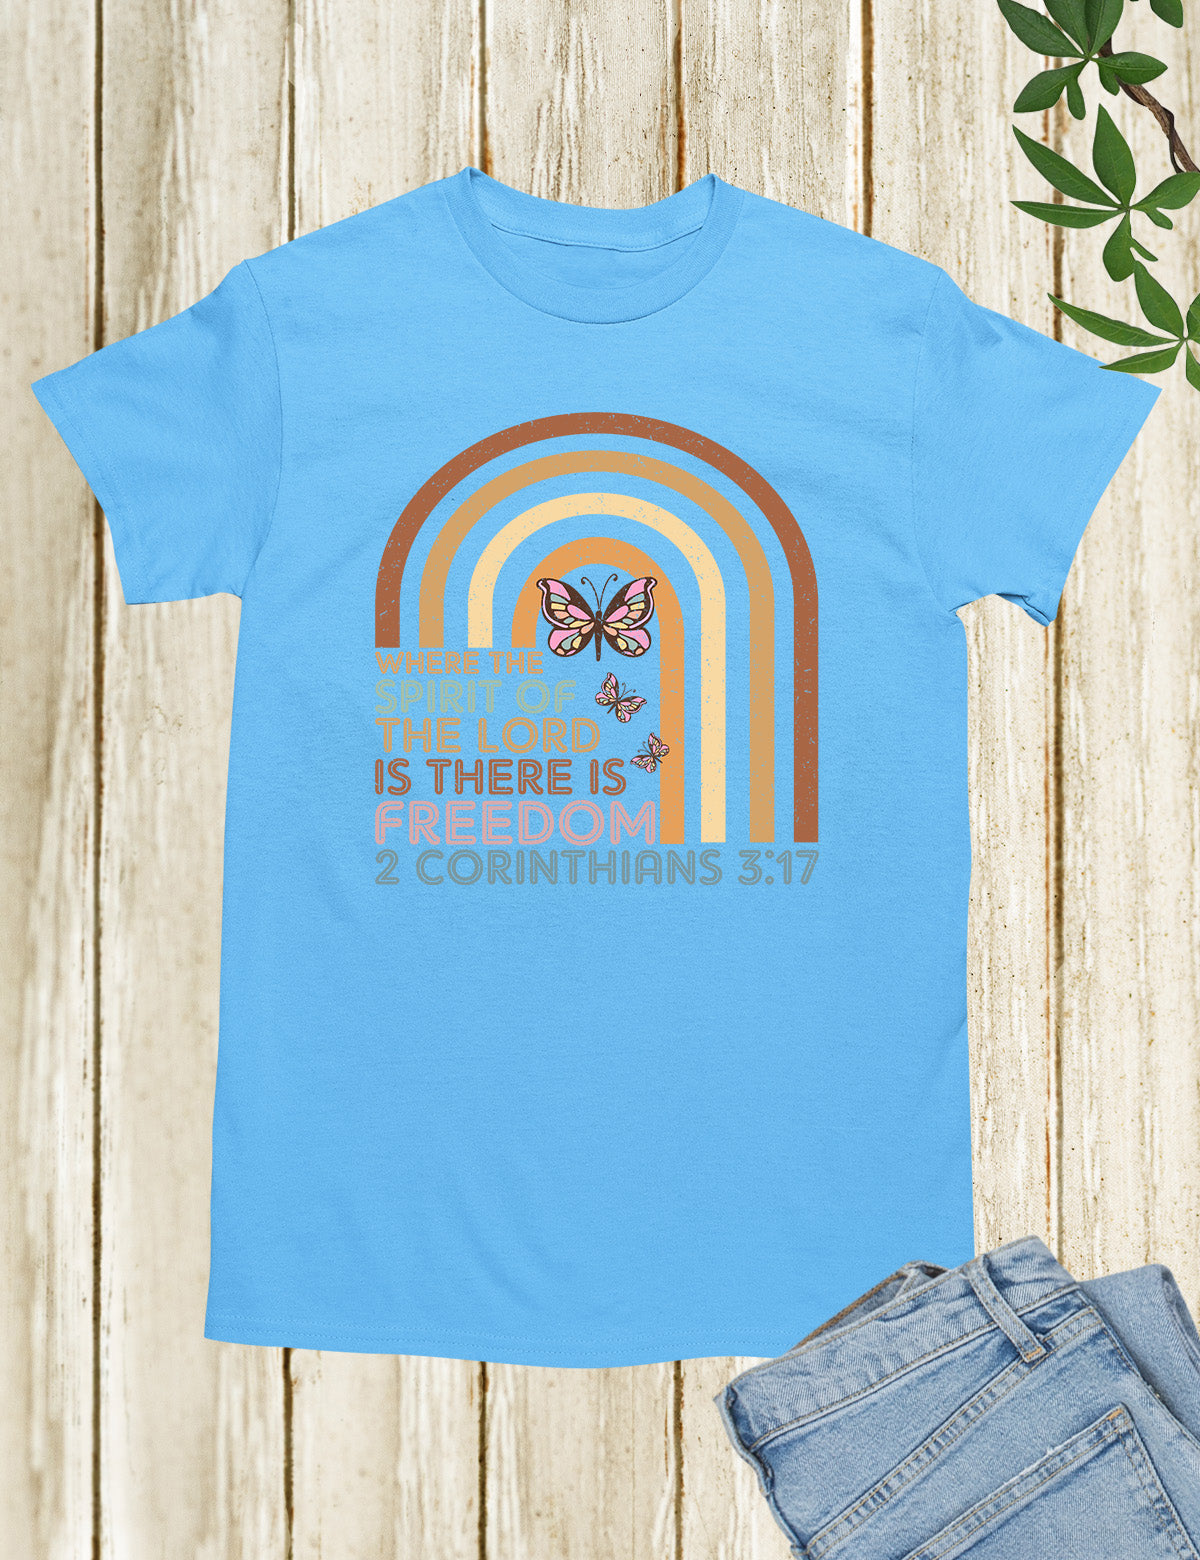 Where The Spirit of The Lord is There is Freedom Shirt